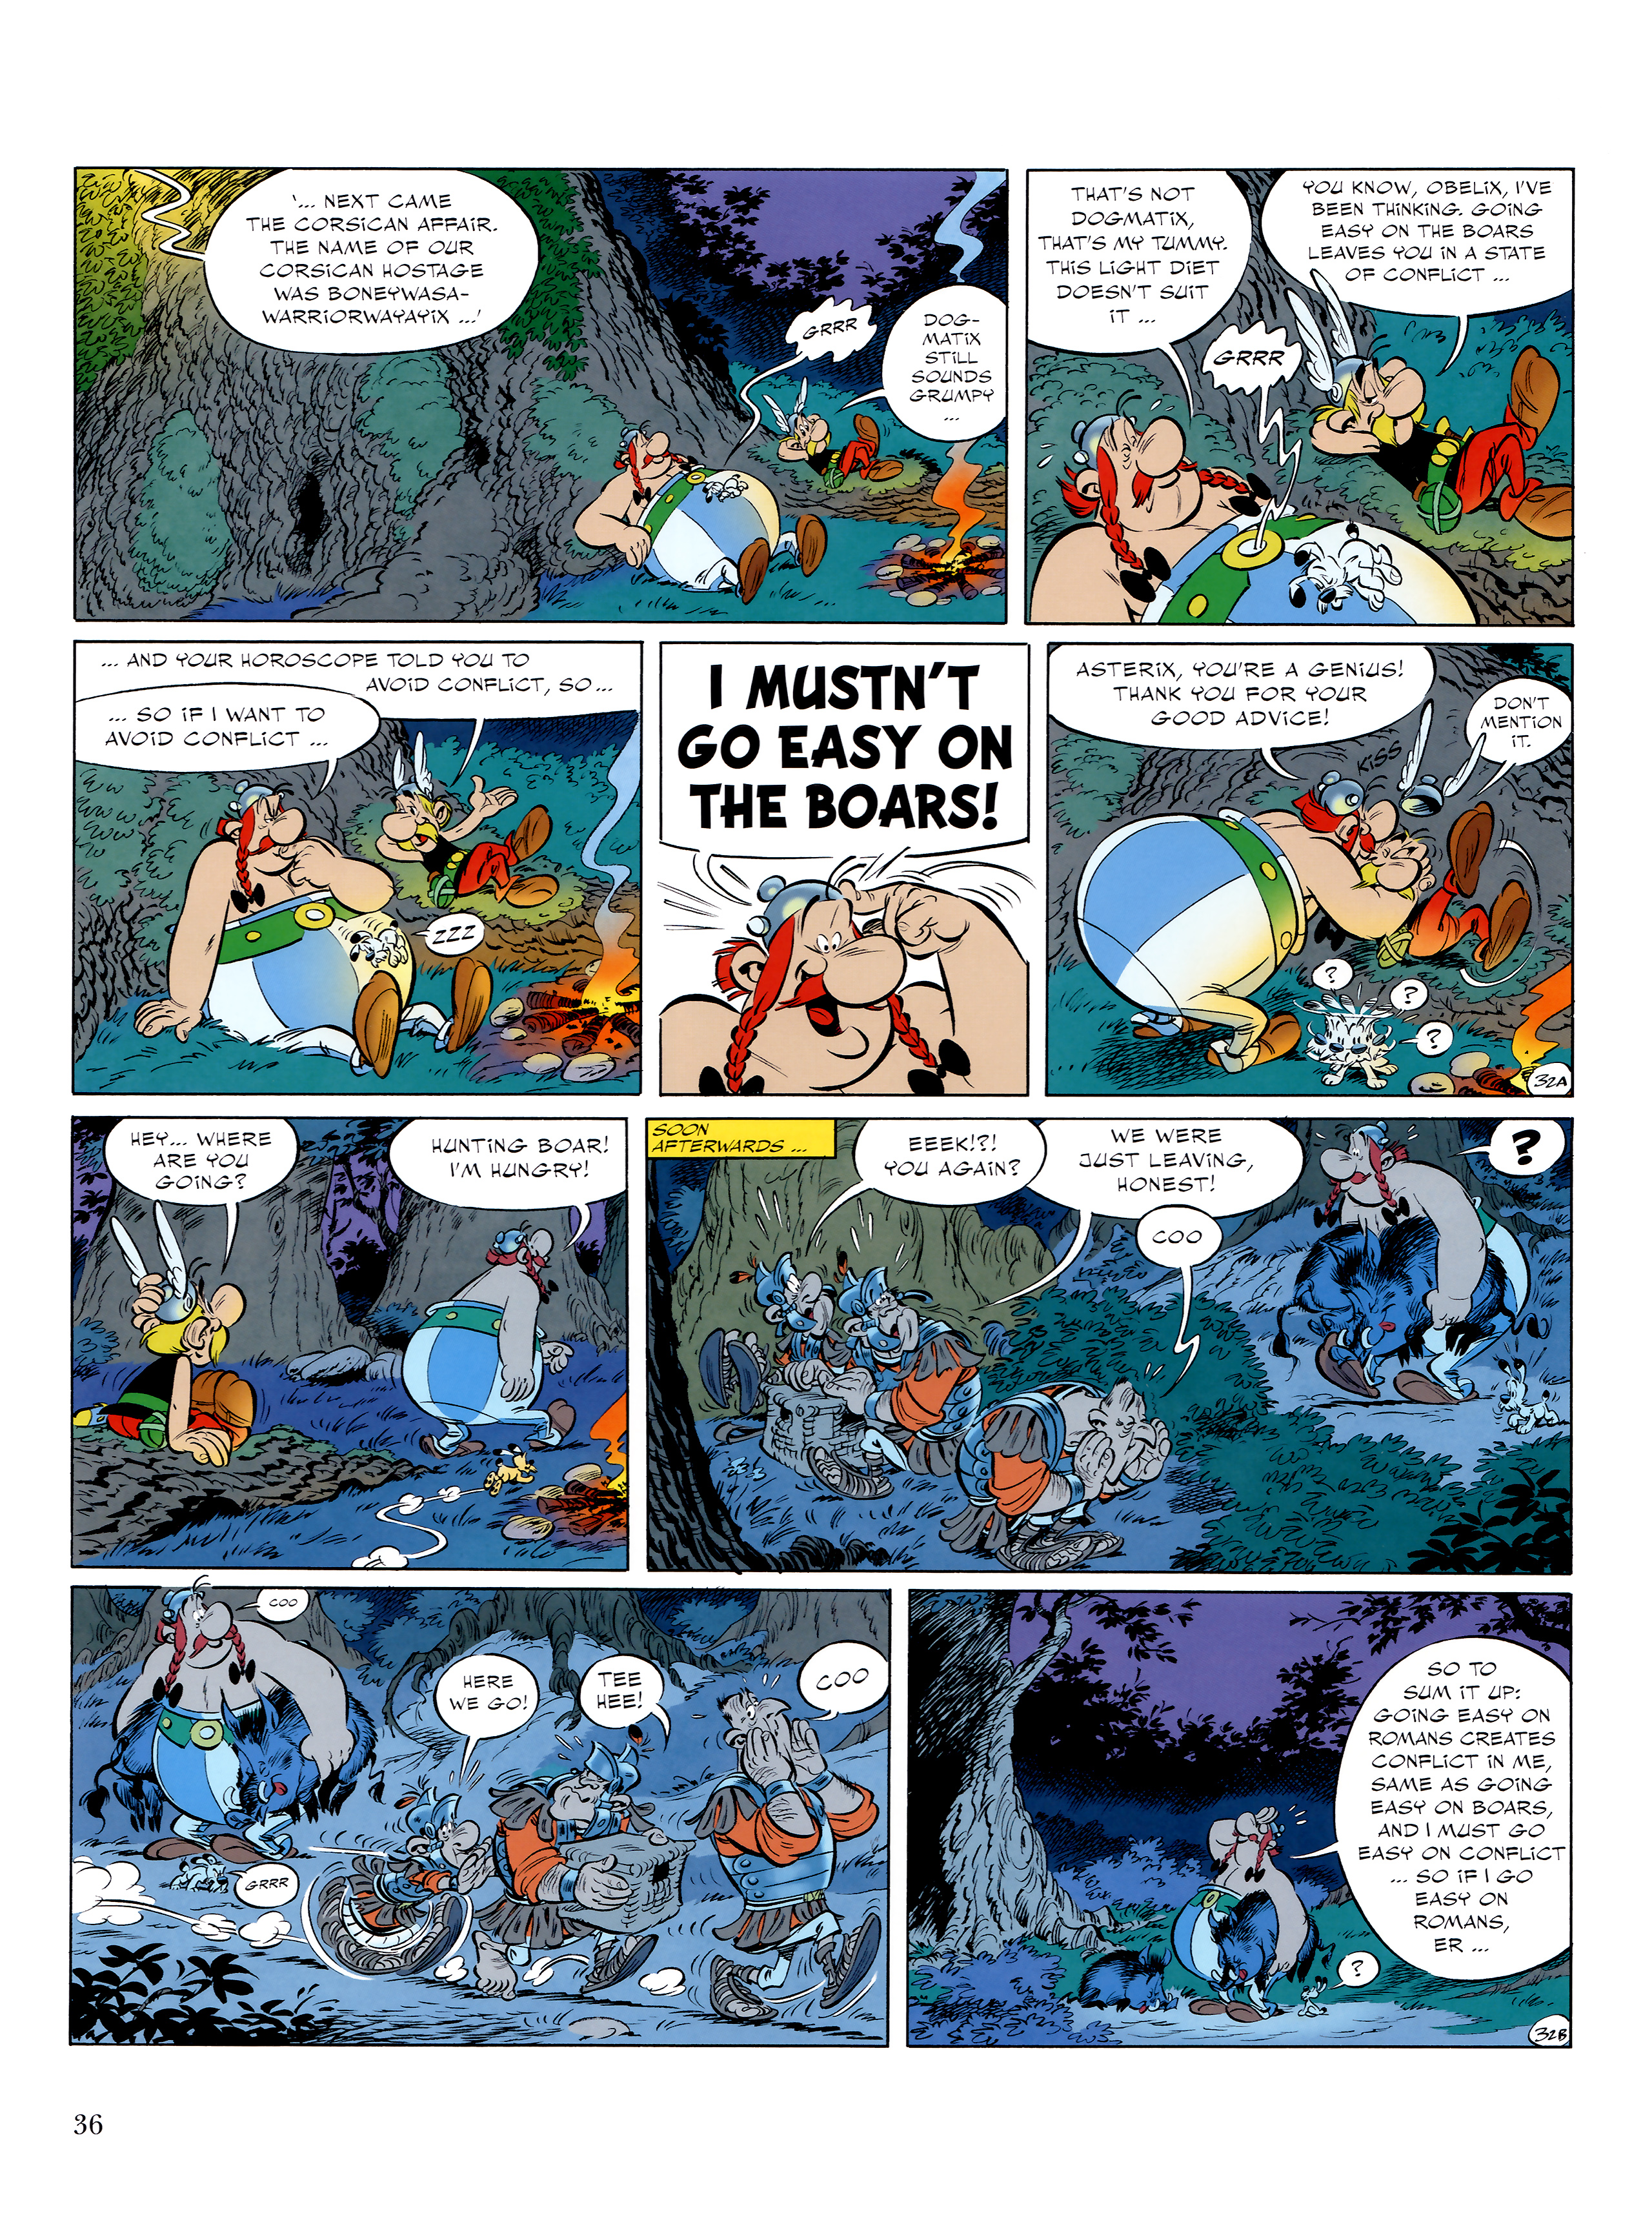 Read online Asterix comic -  Issue #36 - 37